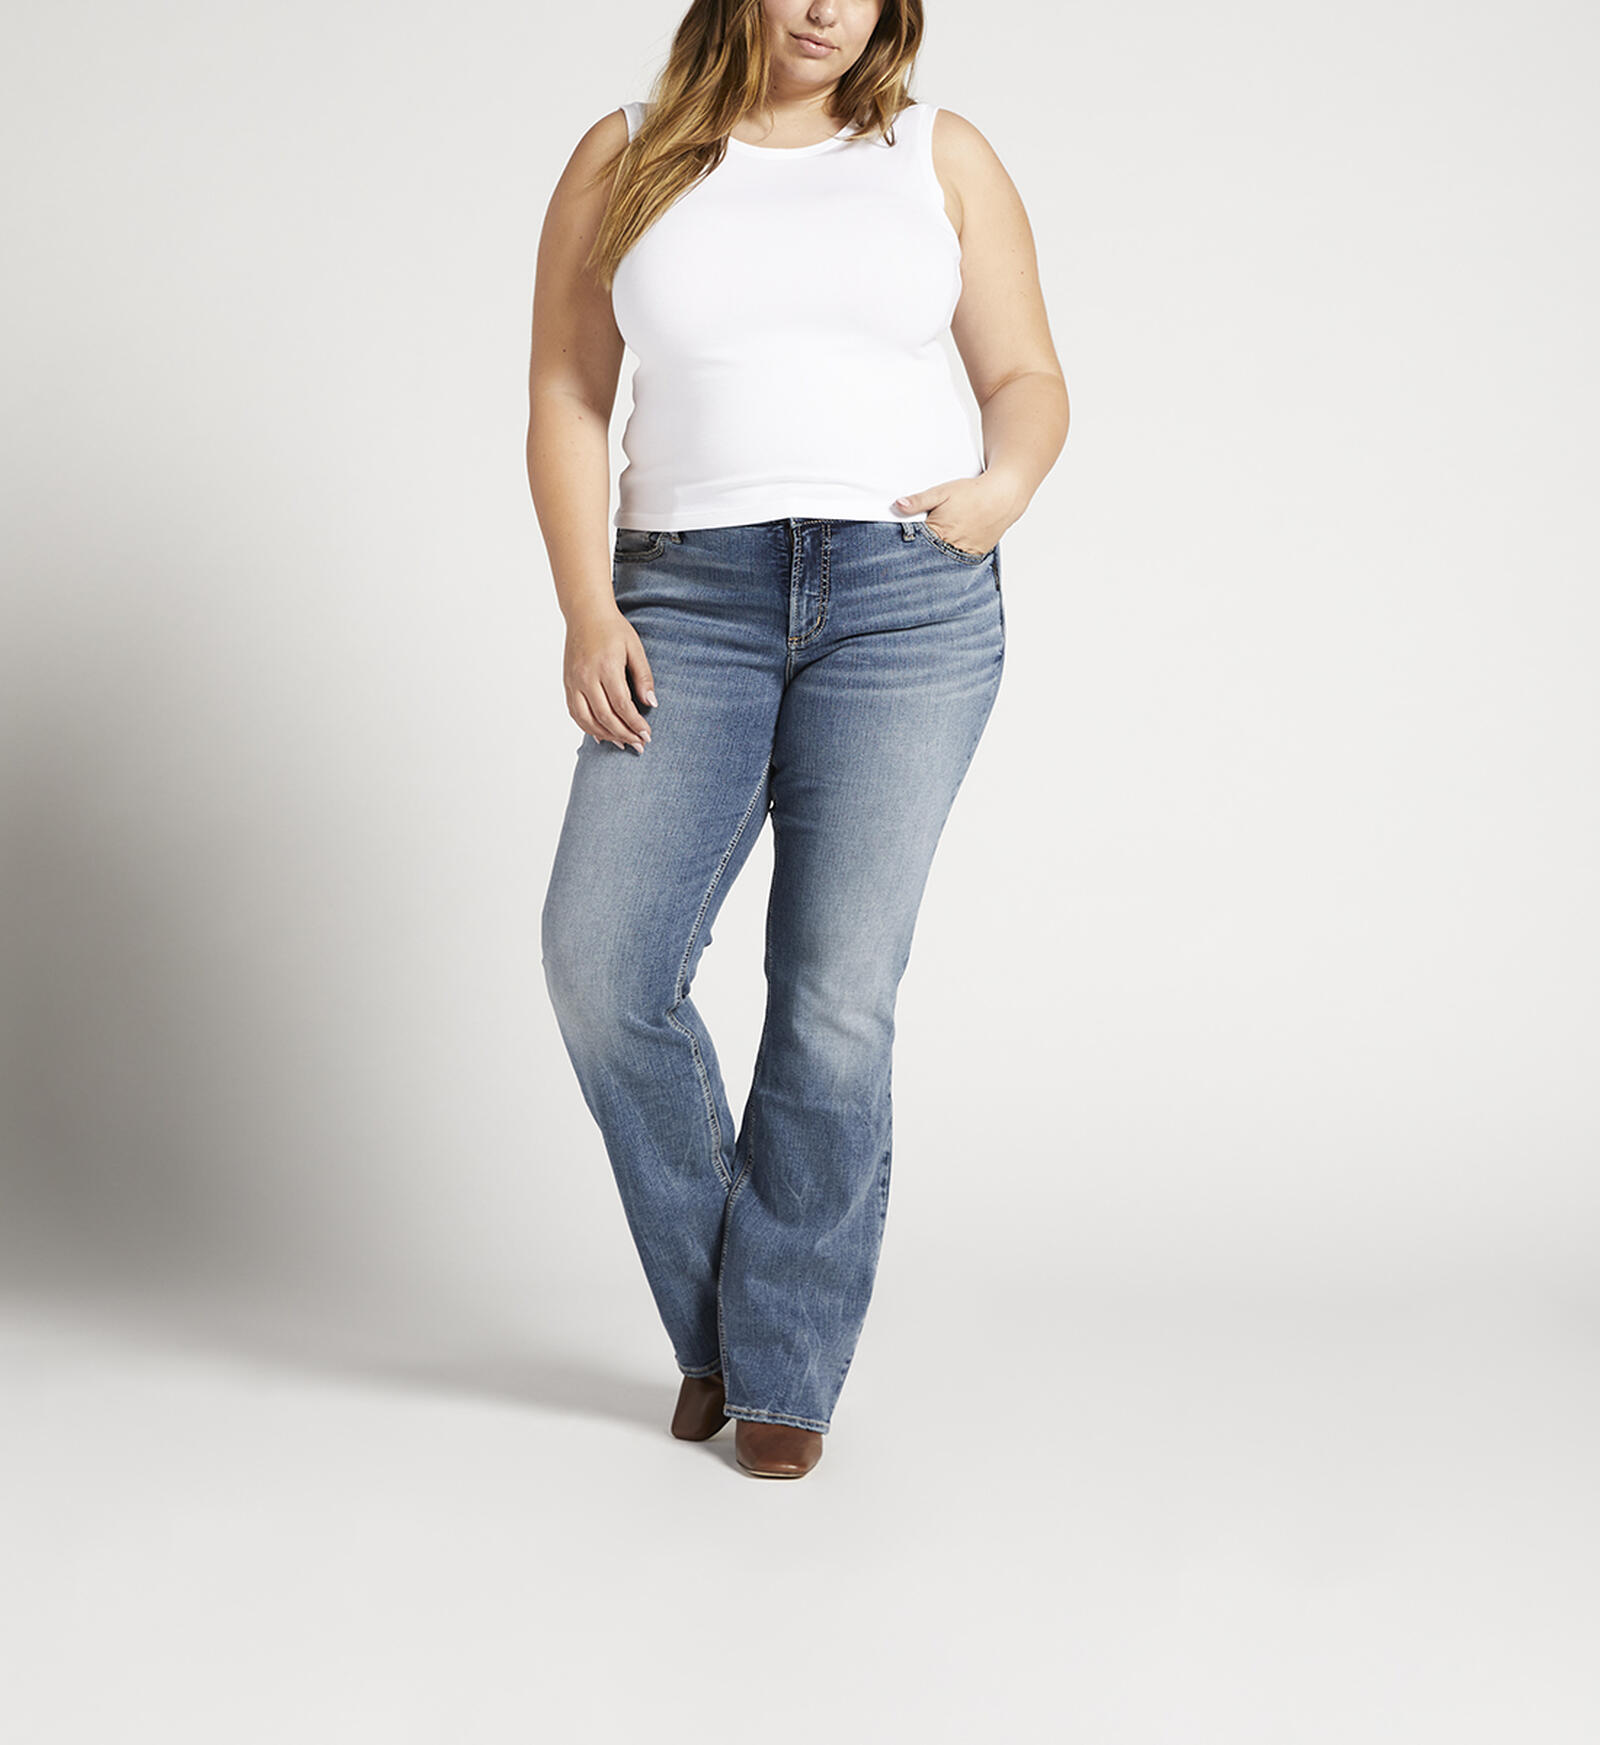 Buy Elyse Mid Rise Slim Bootcut Jeans Plus Size for CAD 108.00